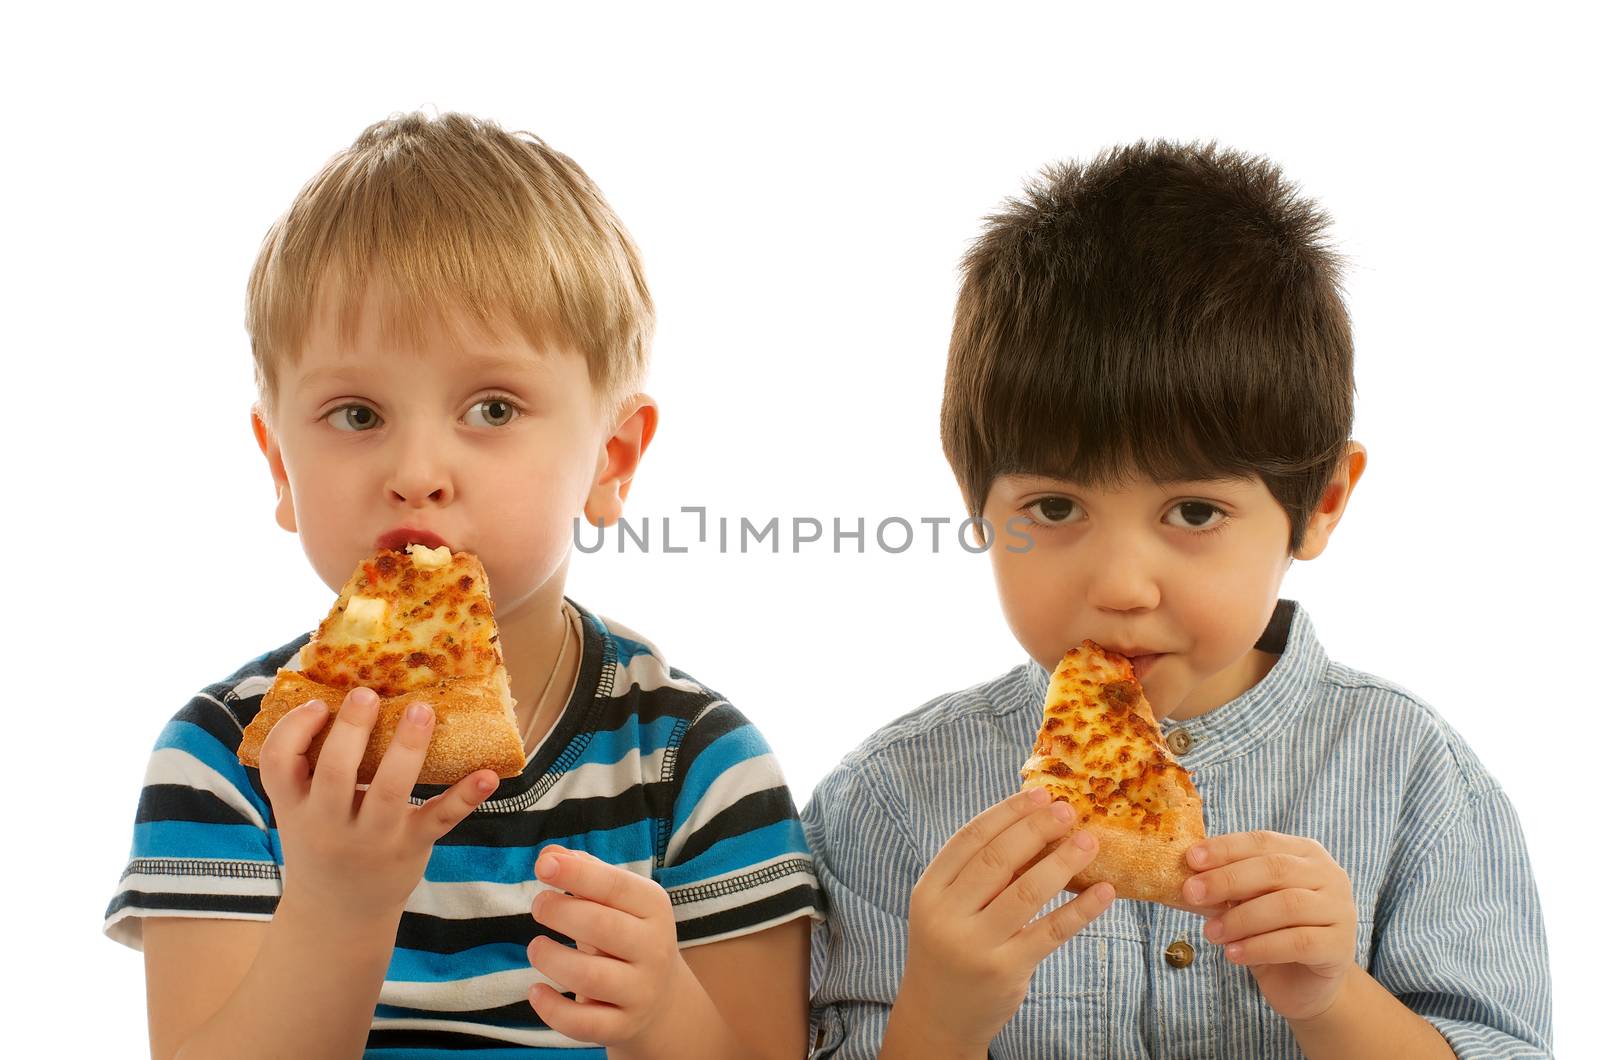 Two Boys with Pizza by zhekos